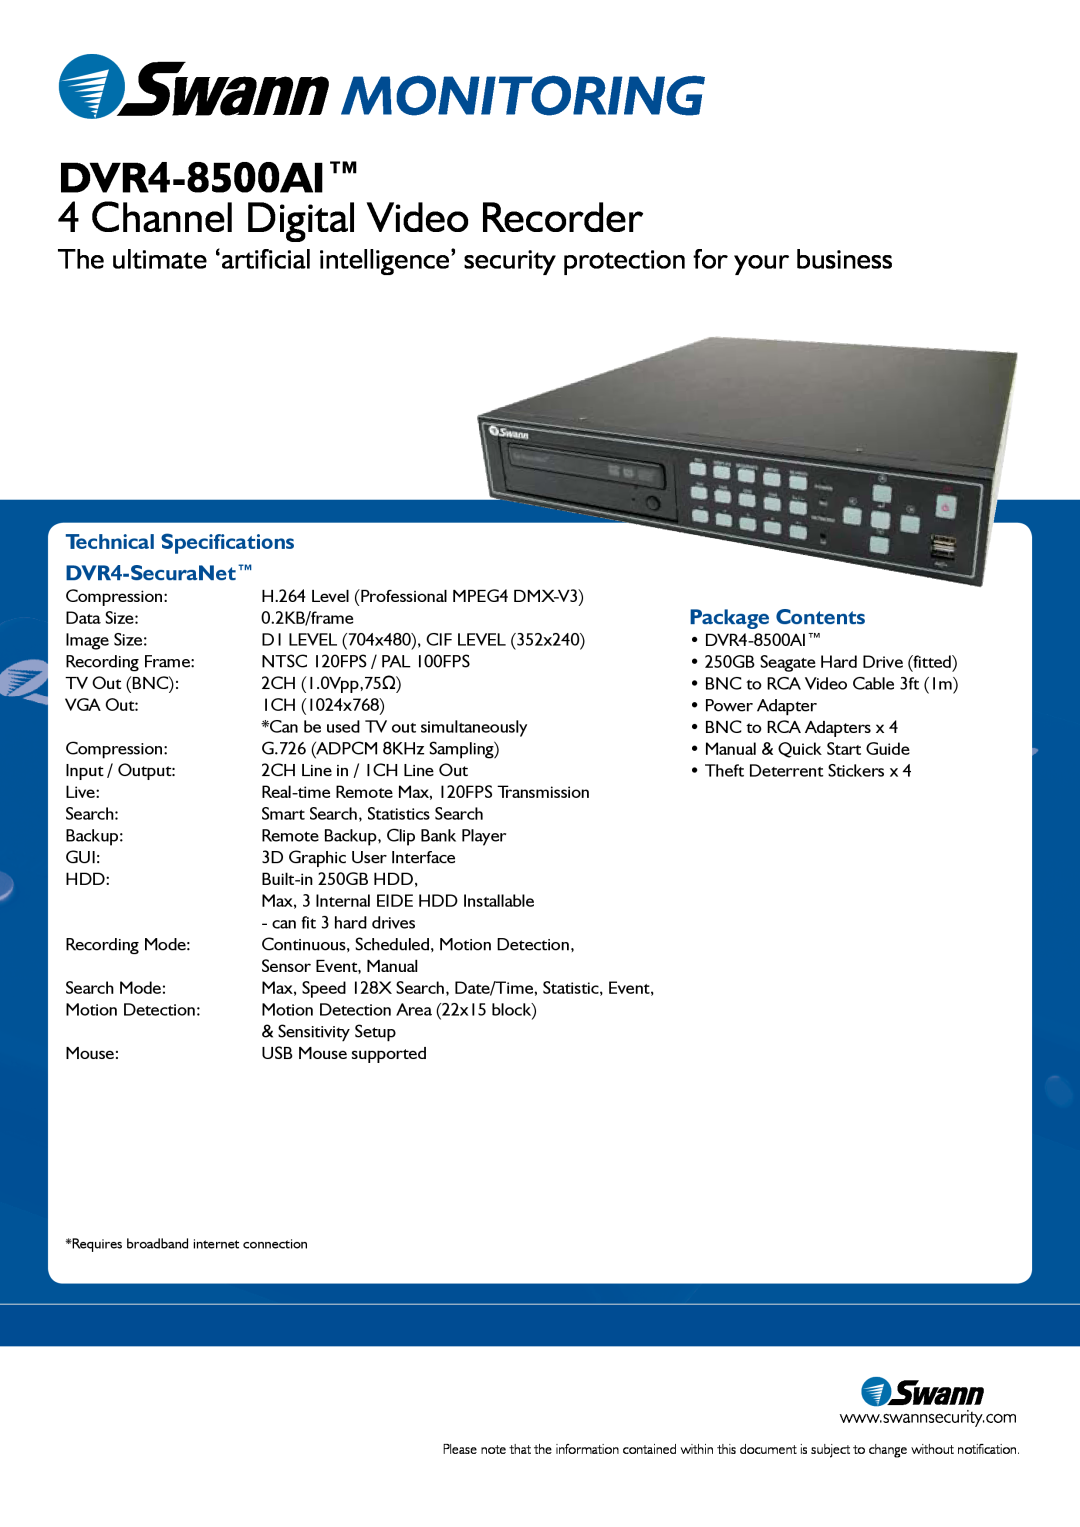 Swann DVR4-8500AI Monitoring, Channel Digital Video Recorder, Technical Specifications DVR4-SecuraNet, Package Contents 